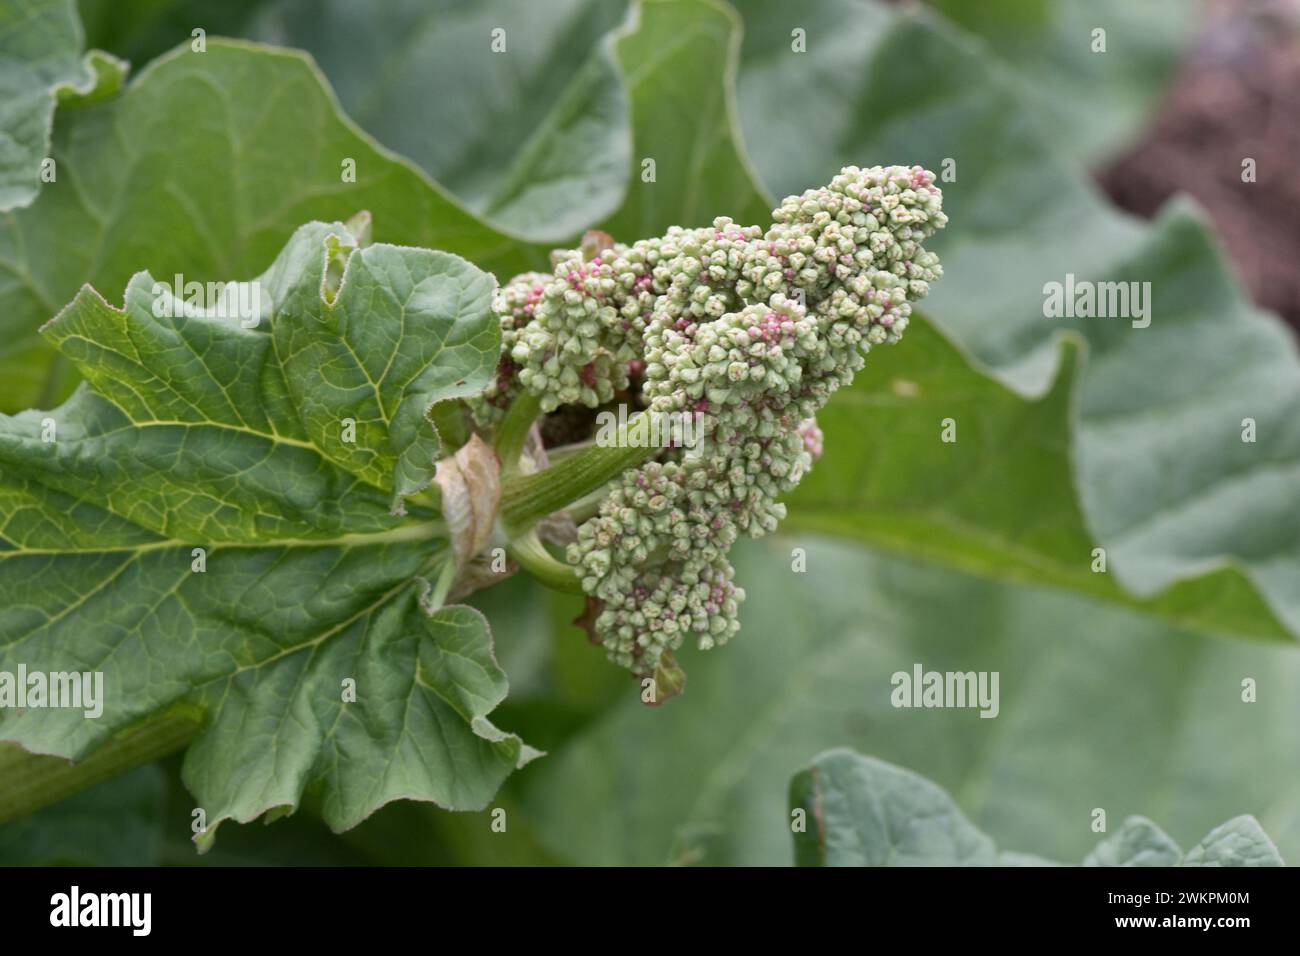 Rhubard flower bud, plant growing leaves vigorously and bolting in early spring, Berkshire, May Stock Photo